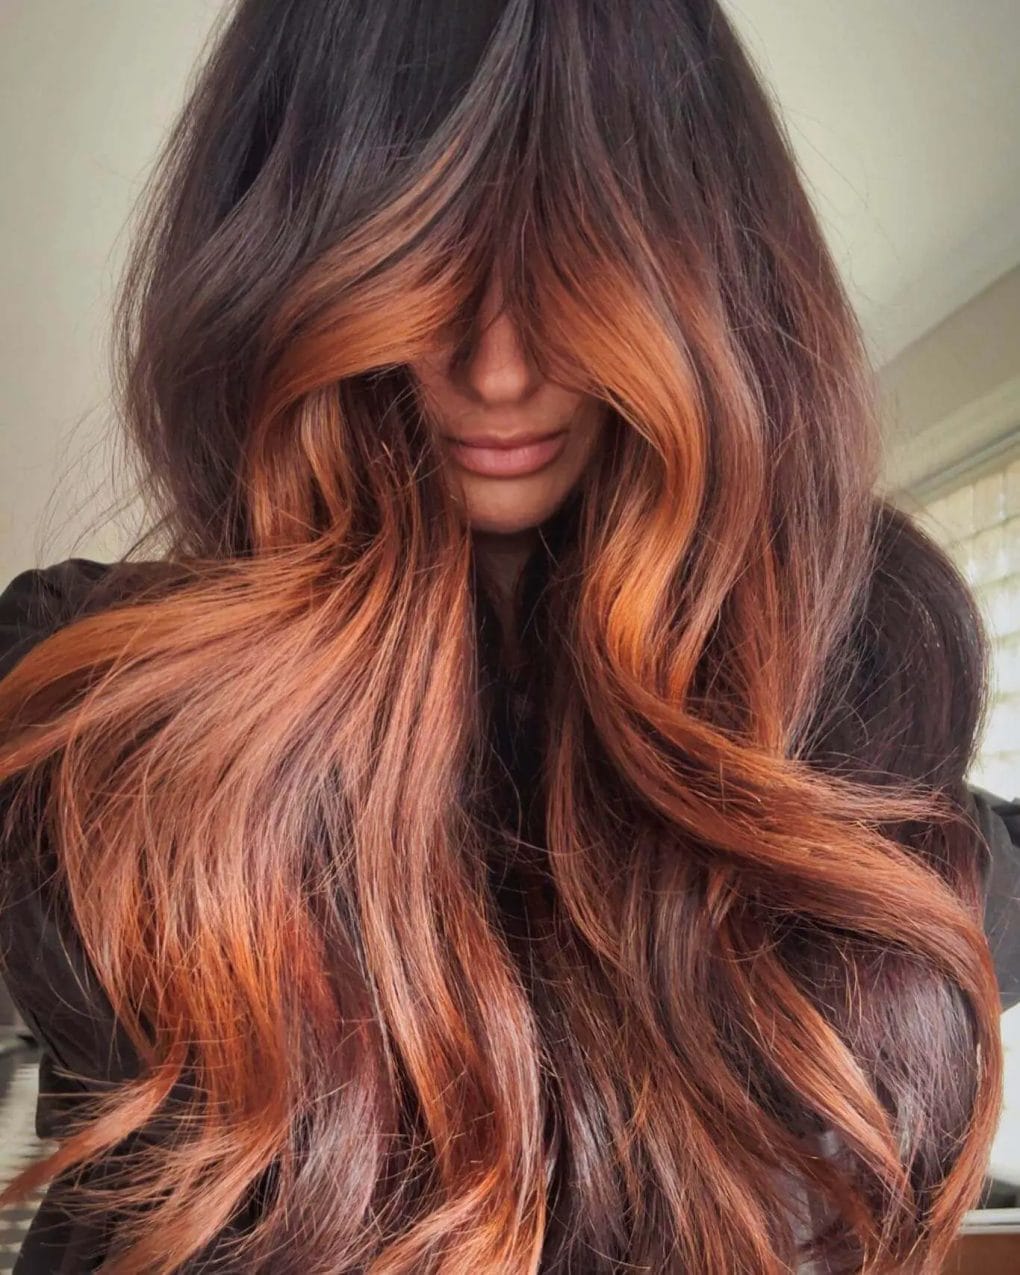 Bold shadow root with vibrant copper waves and flowing layers.